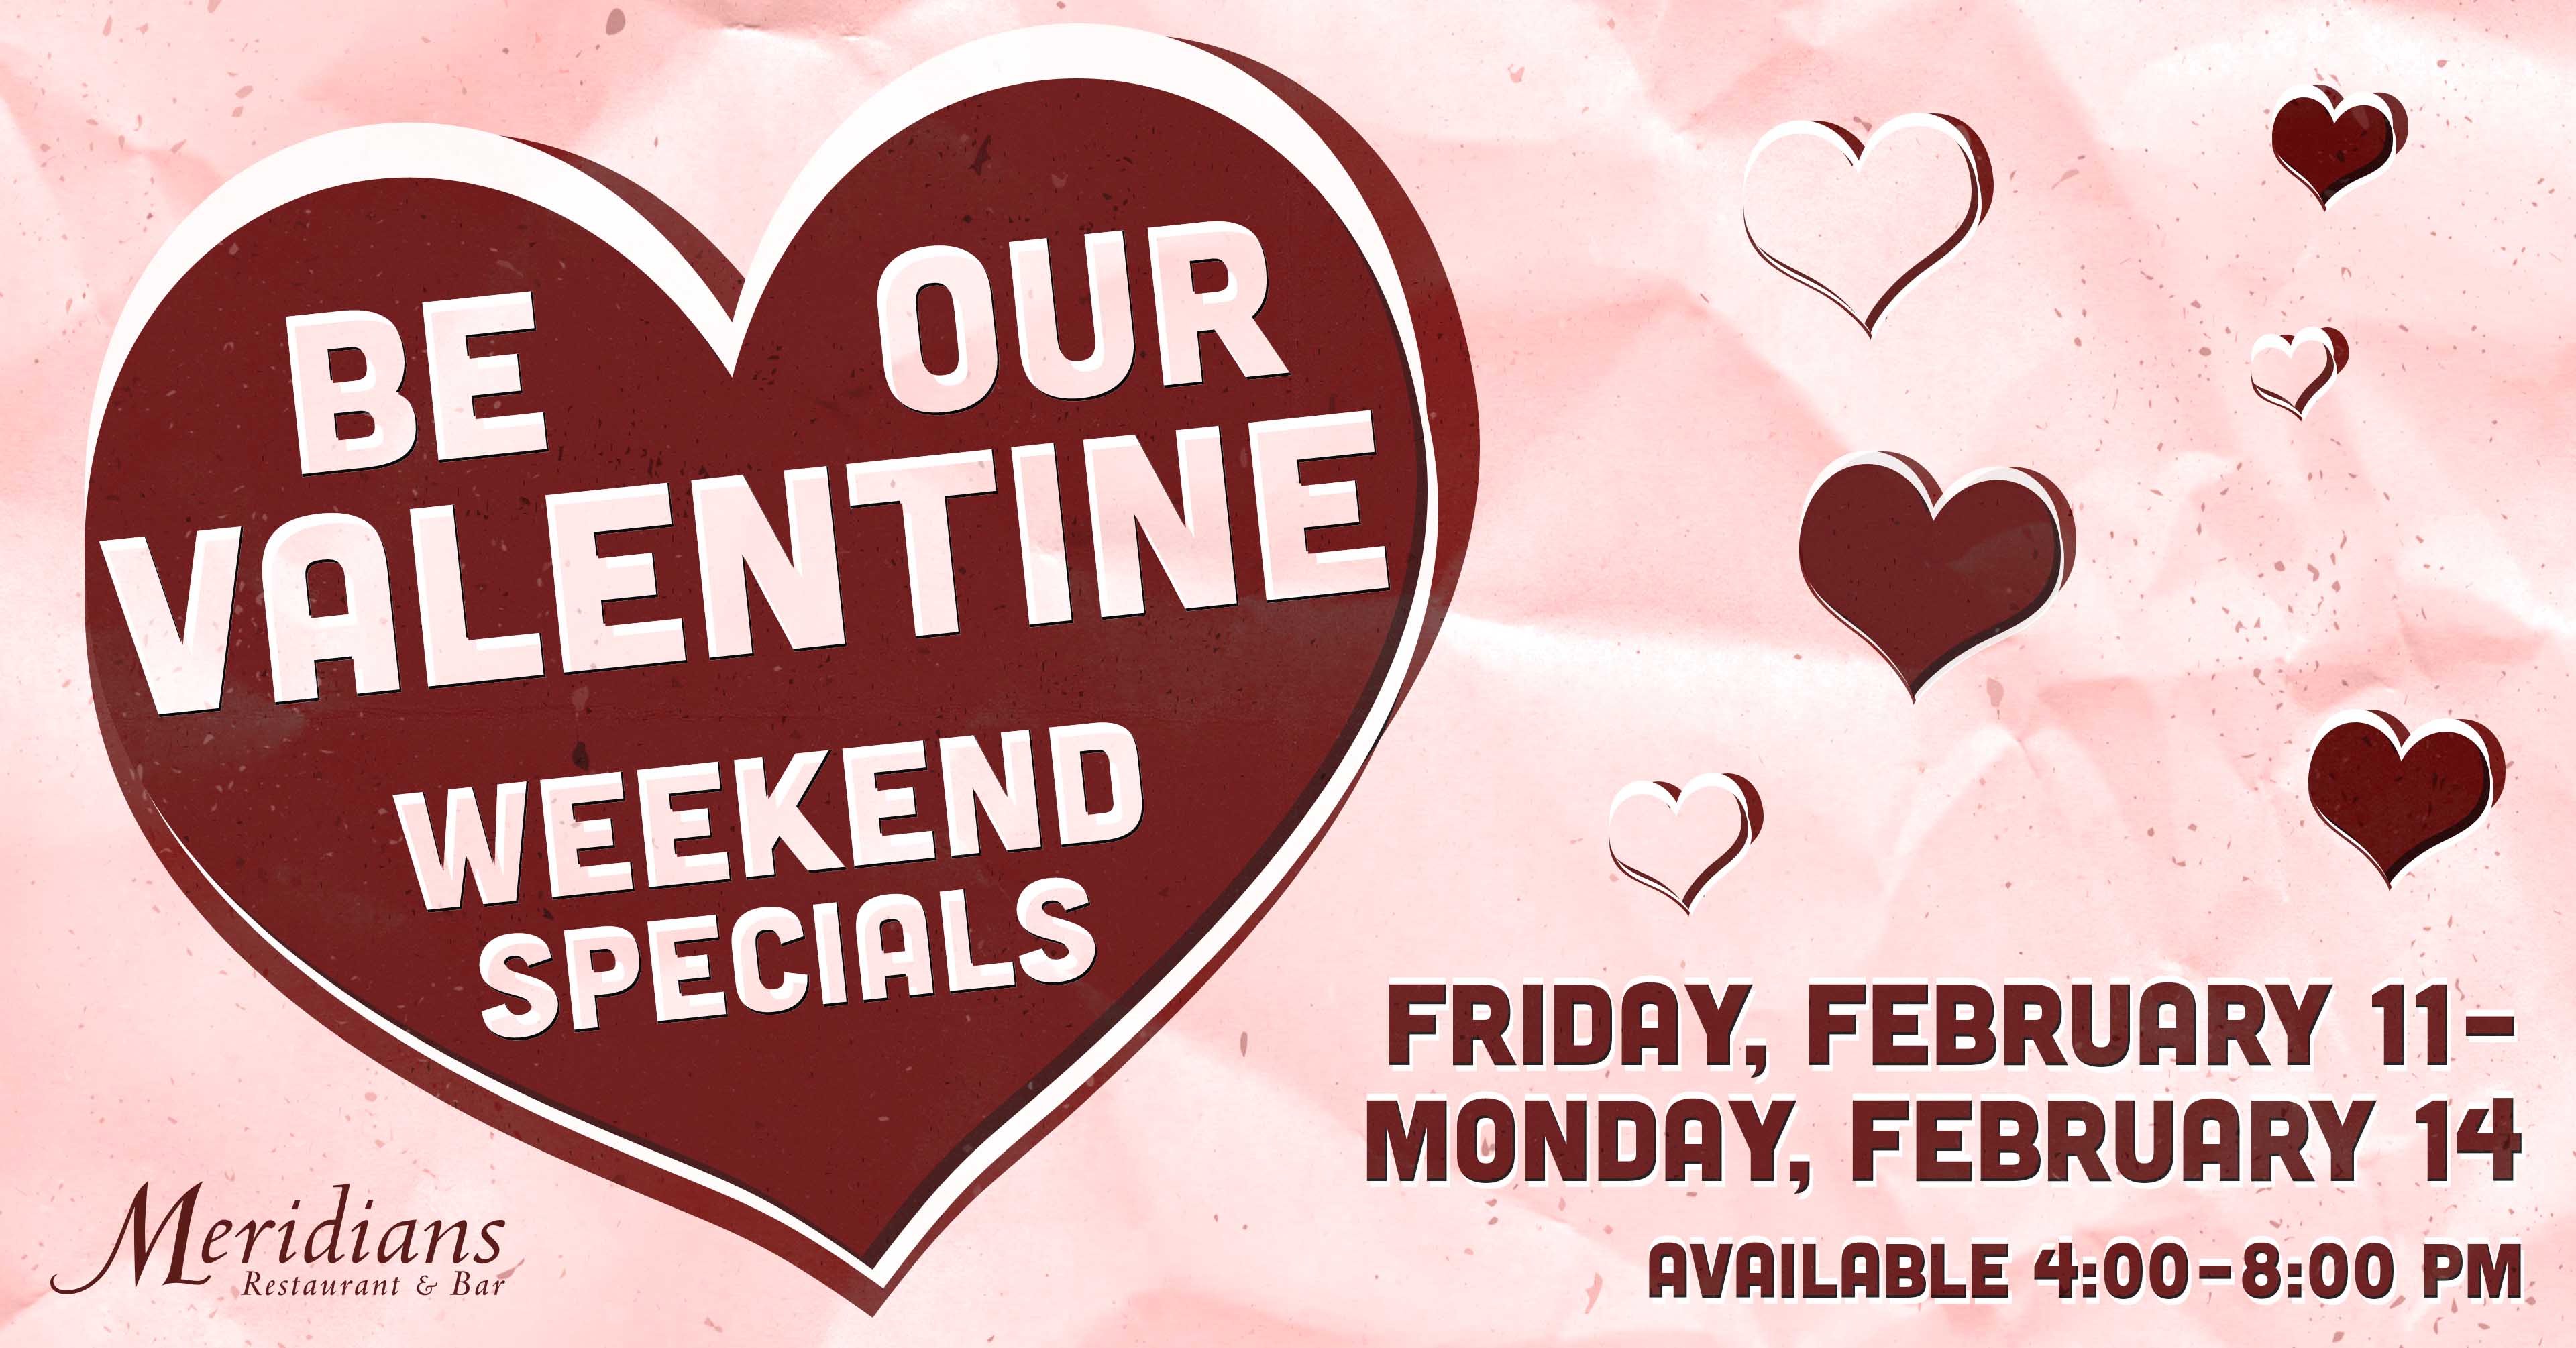 Be Our Valentine Weekend Specials